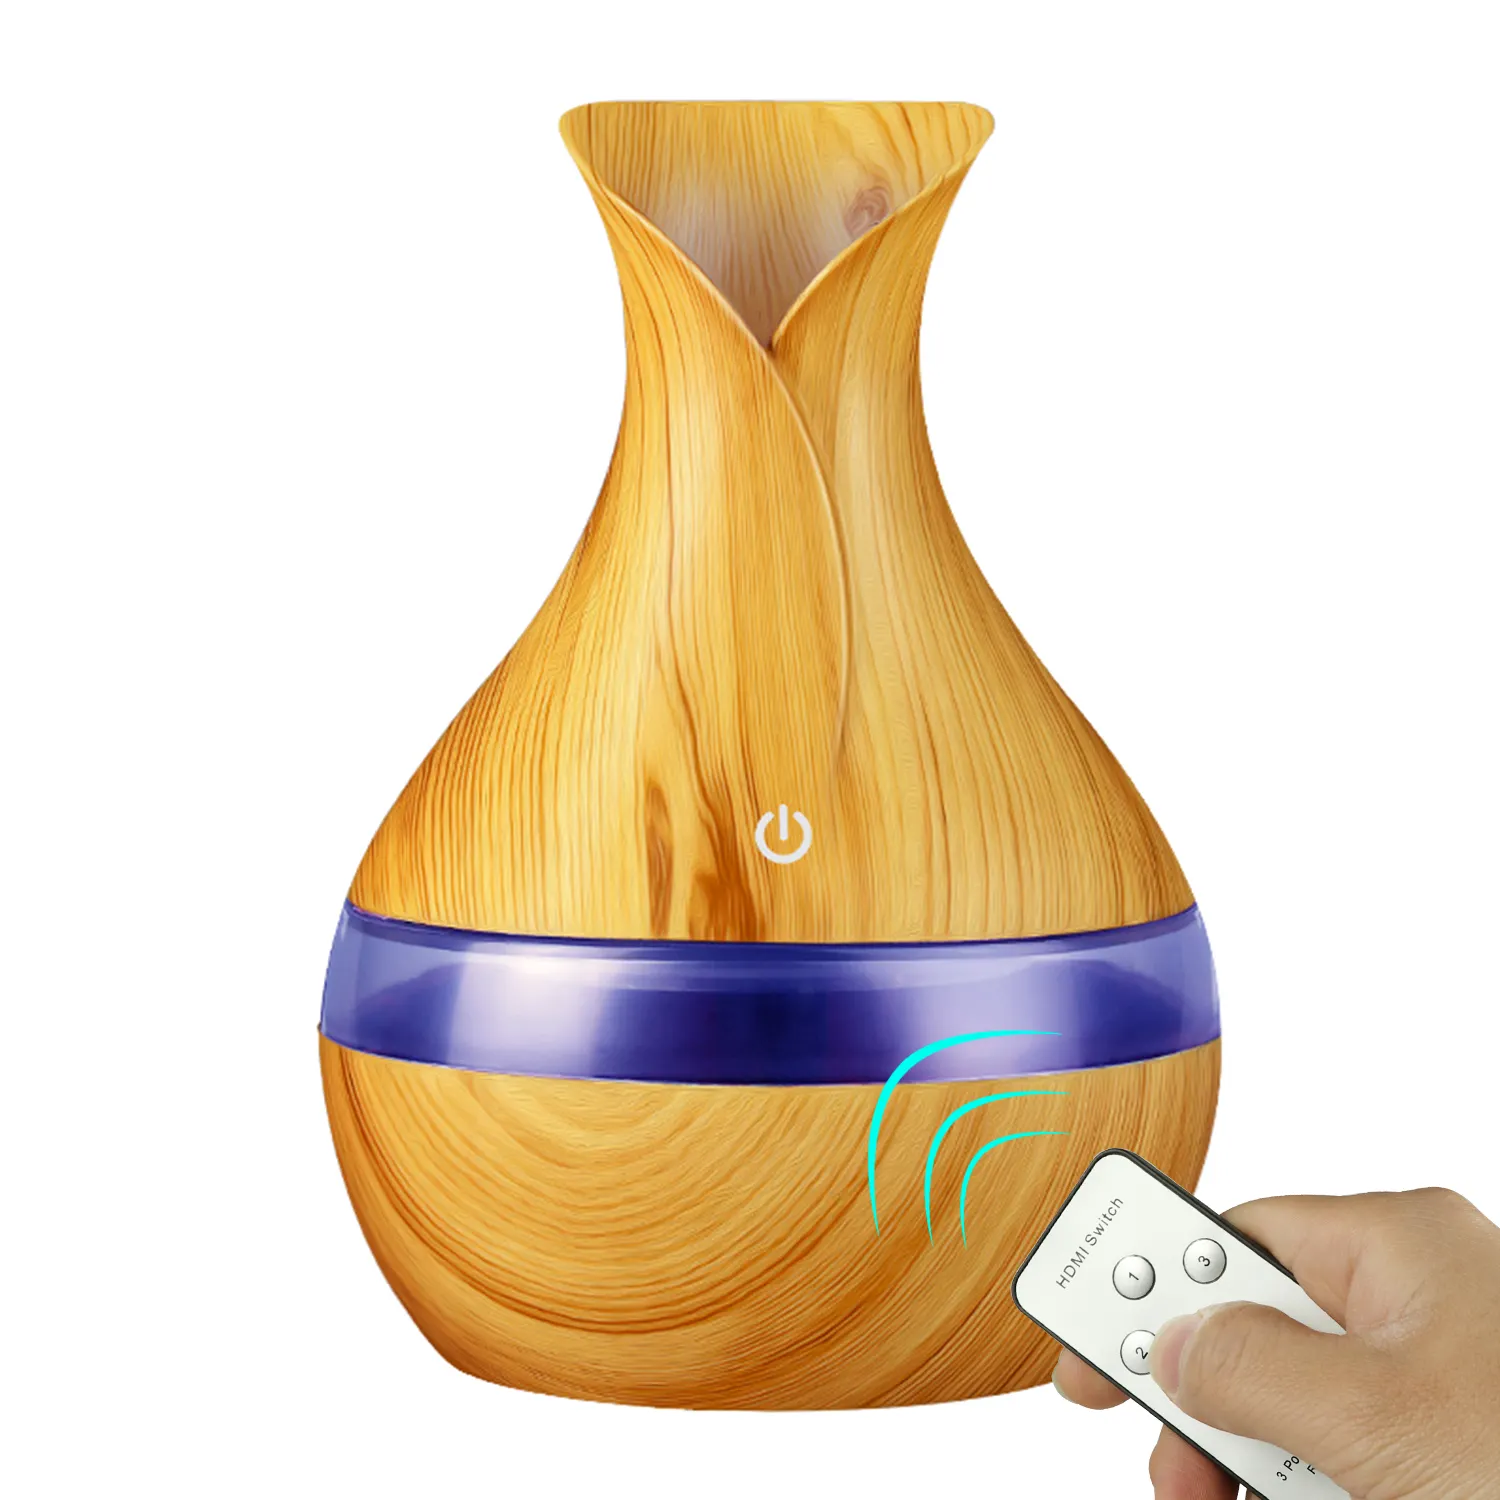 300ml USB humidifier remote control Mini diffuser vase electric Aroma Essential Oil mist for home Air Humidifier Wood Grain LED